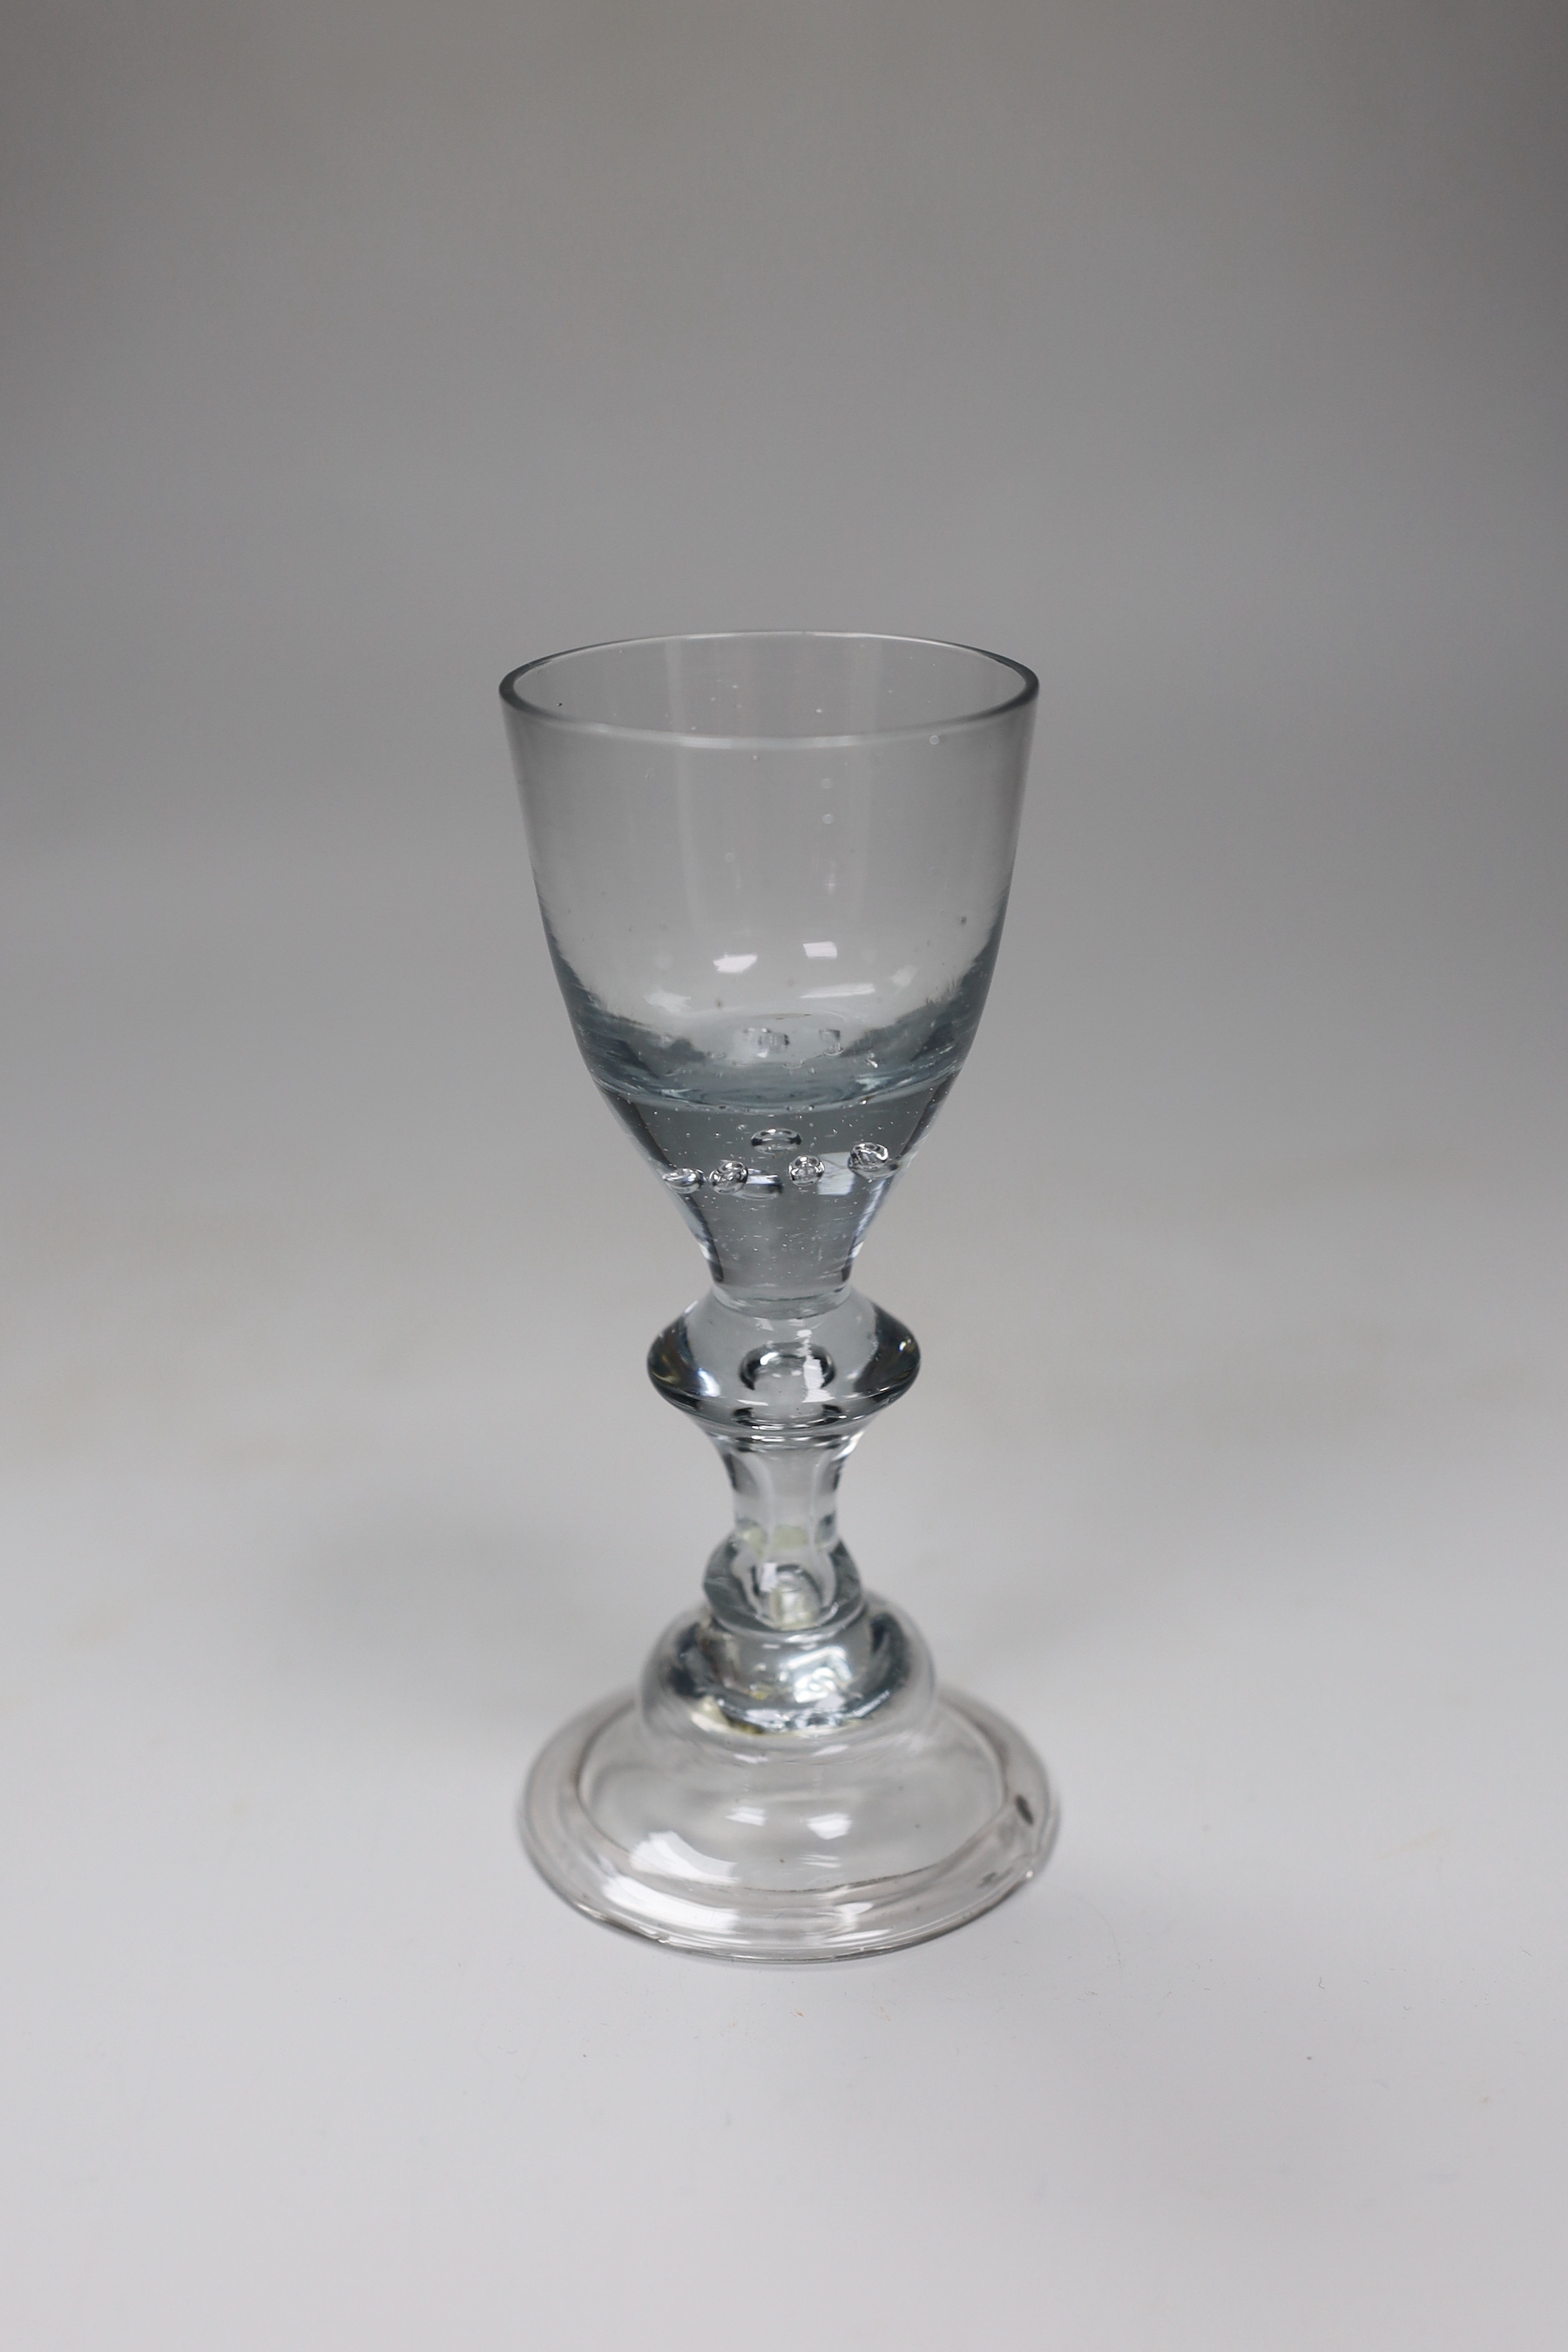 An unusual George II wine glass, bowl with air-tears, angular knop and domed foot, 13.5cm tall                                                                                                                              